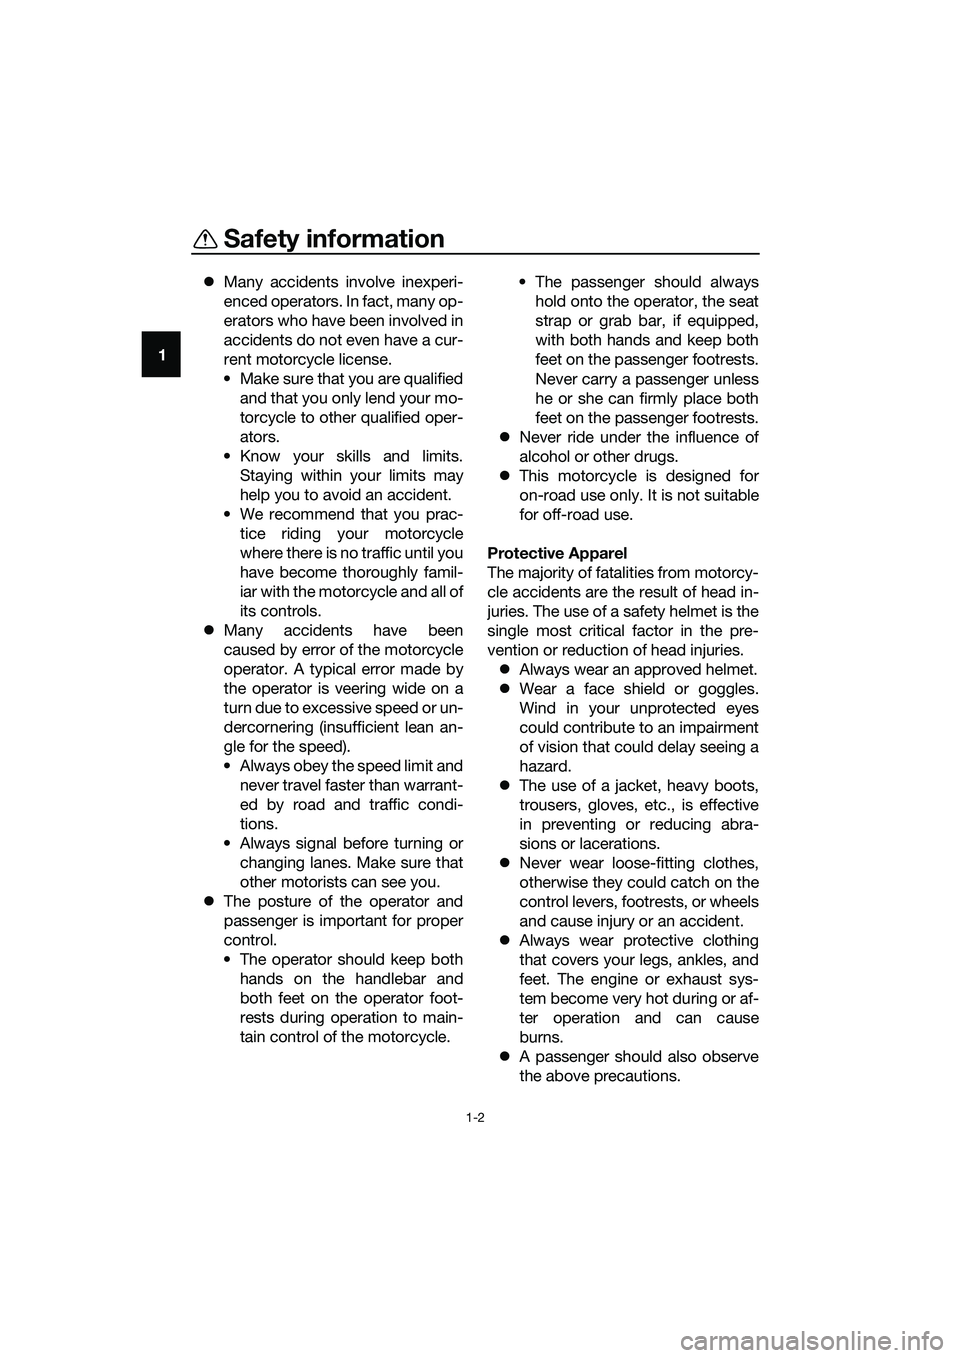 YAMAHA MT-03 2018  Owners Manual Safety information
1-2
1�z
Many accidents involve inexperi-
enced operators. In fact, many op-
erators who have been involved in
accidents do not even have a cur-
rent motorcycle license.
• Make sur